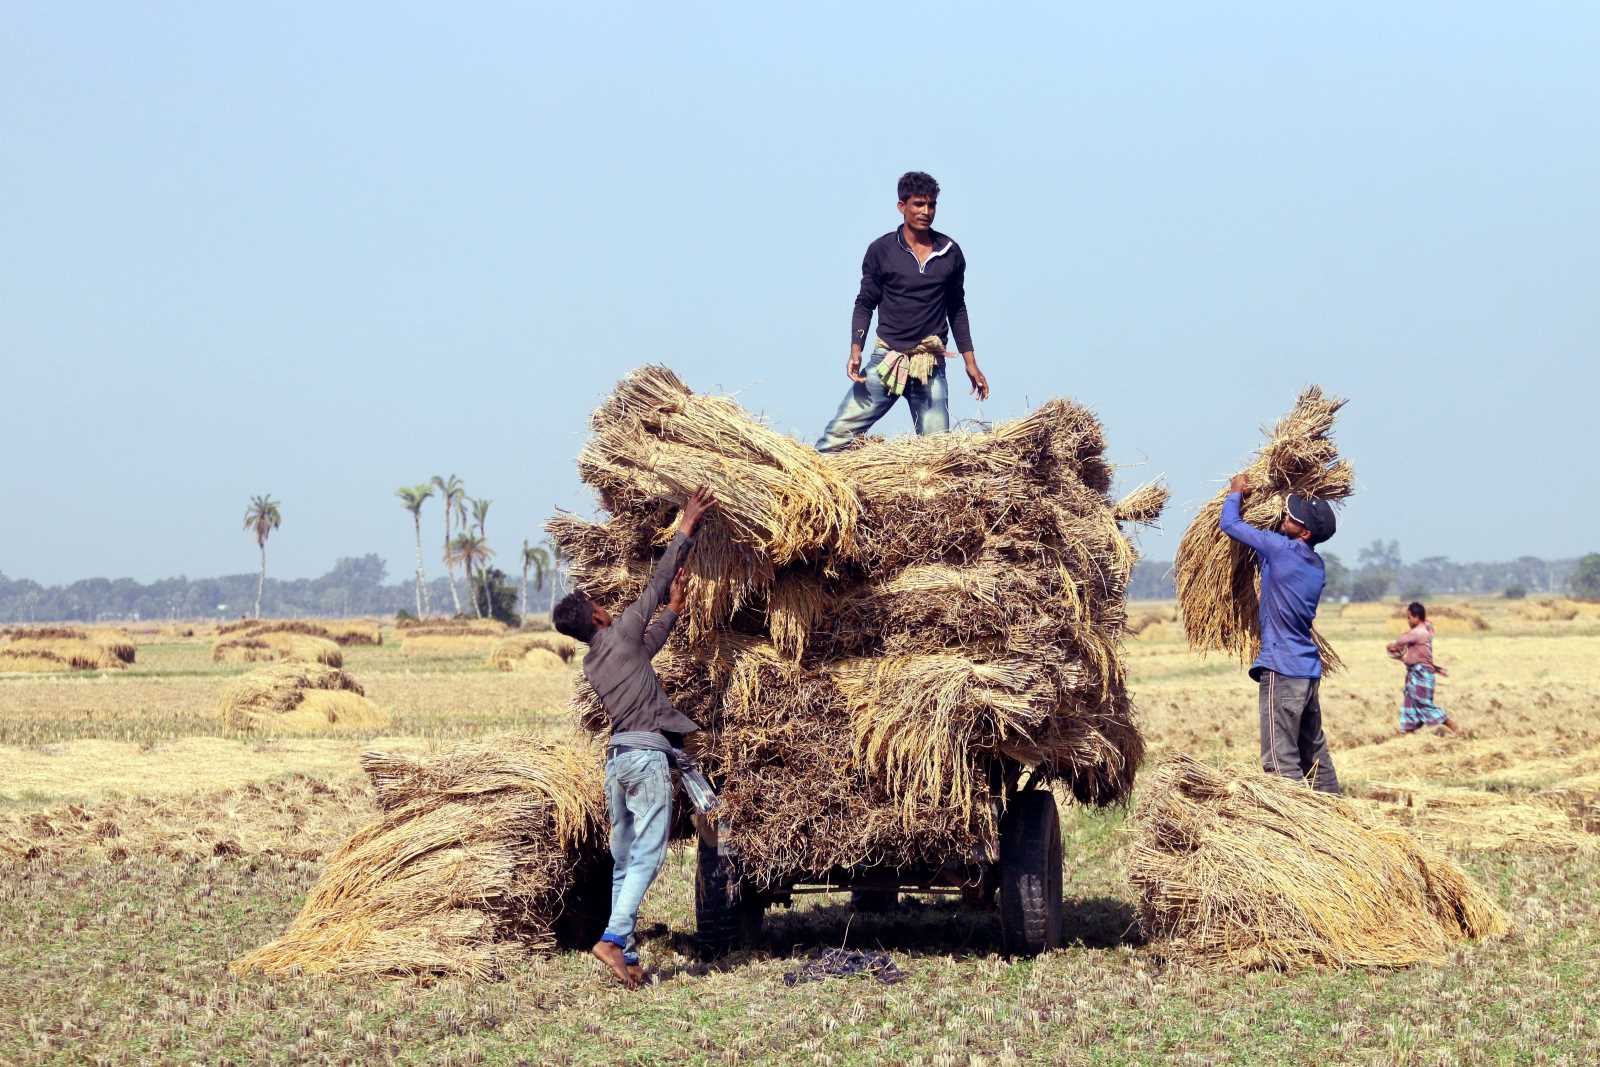 Farmers need protection against climate risks: Harvesting rice in Bangladesh.